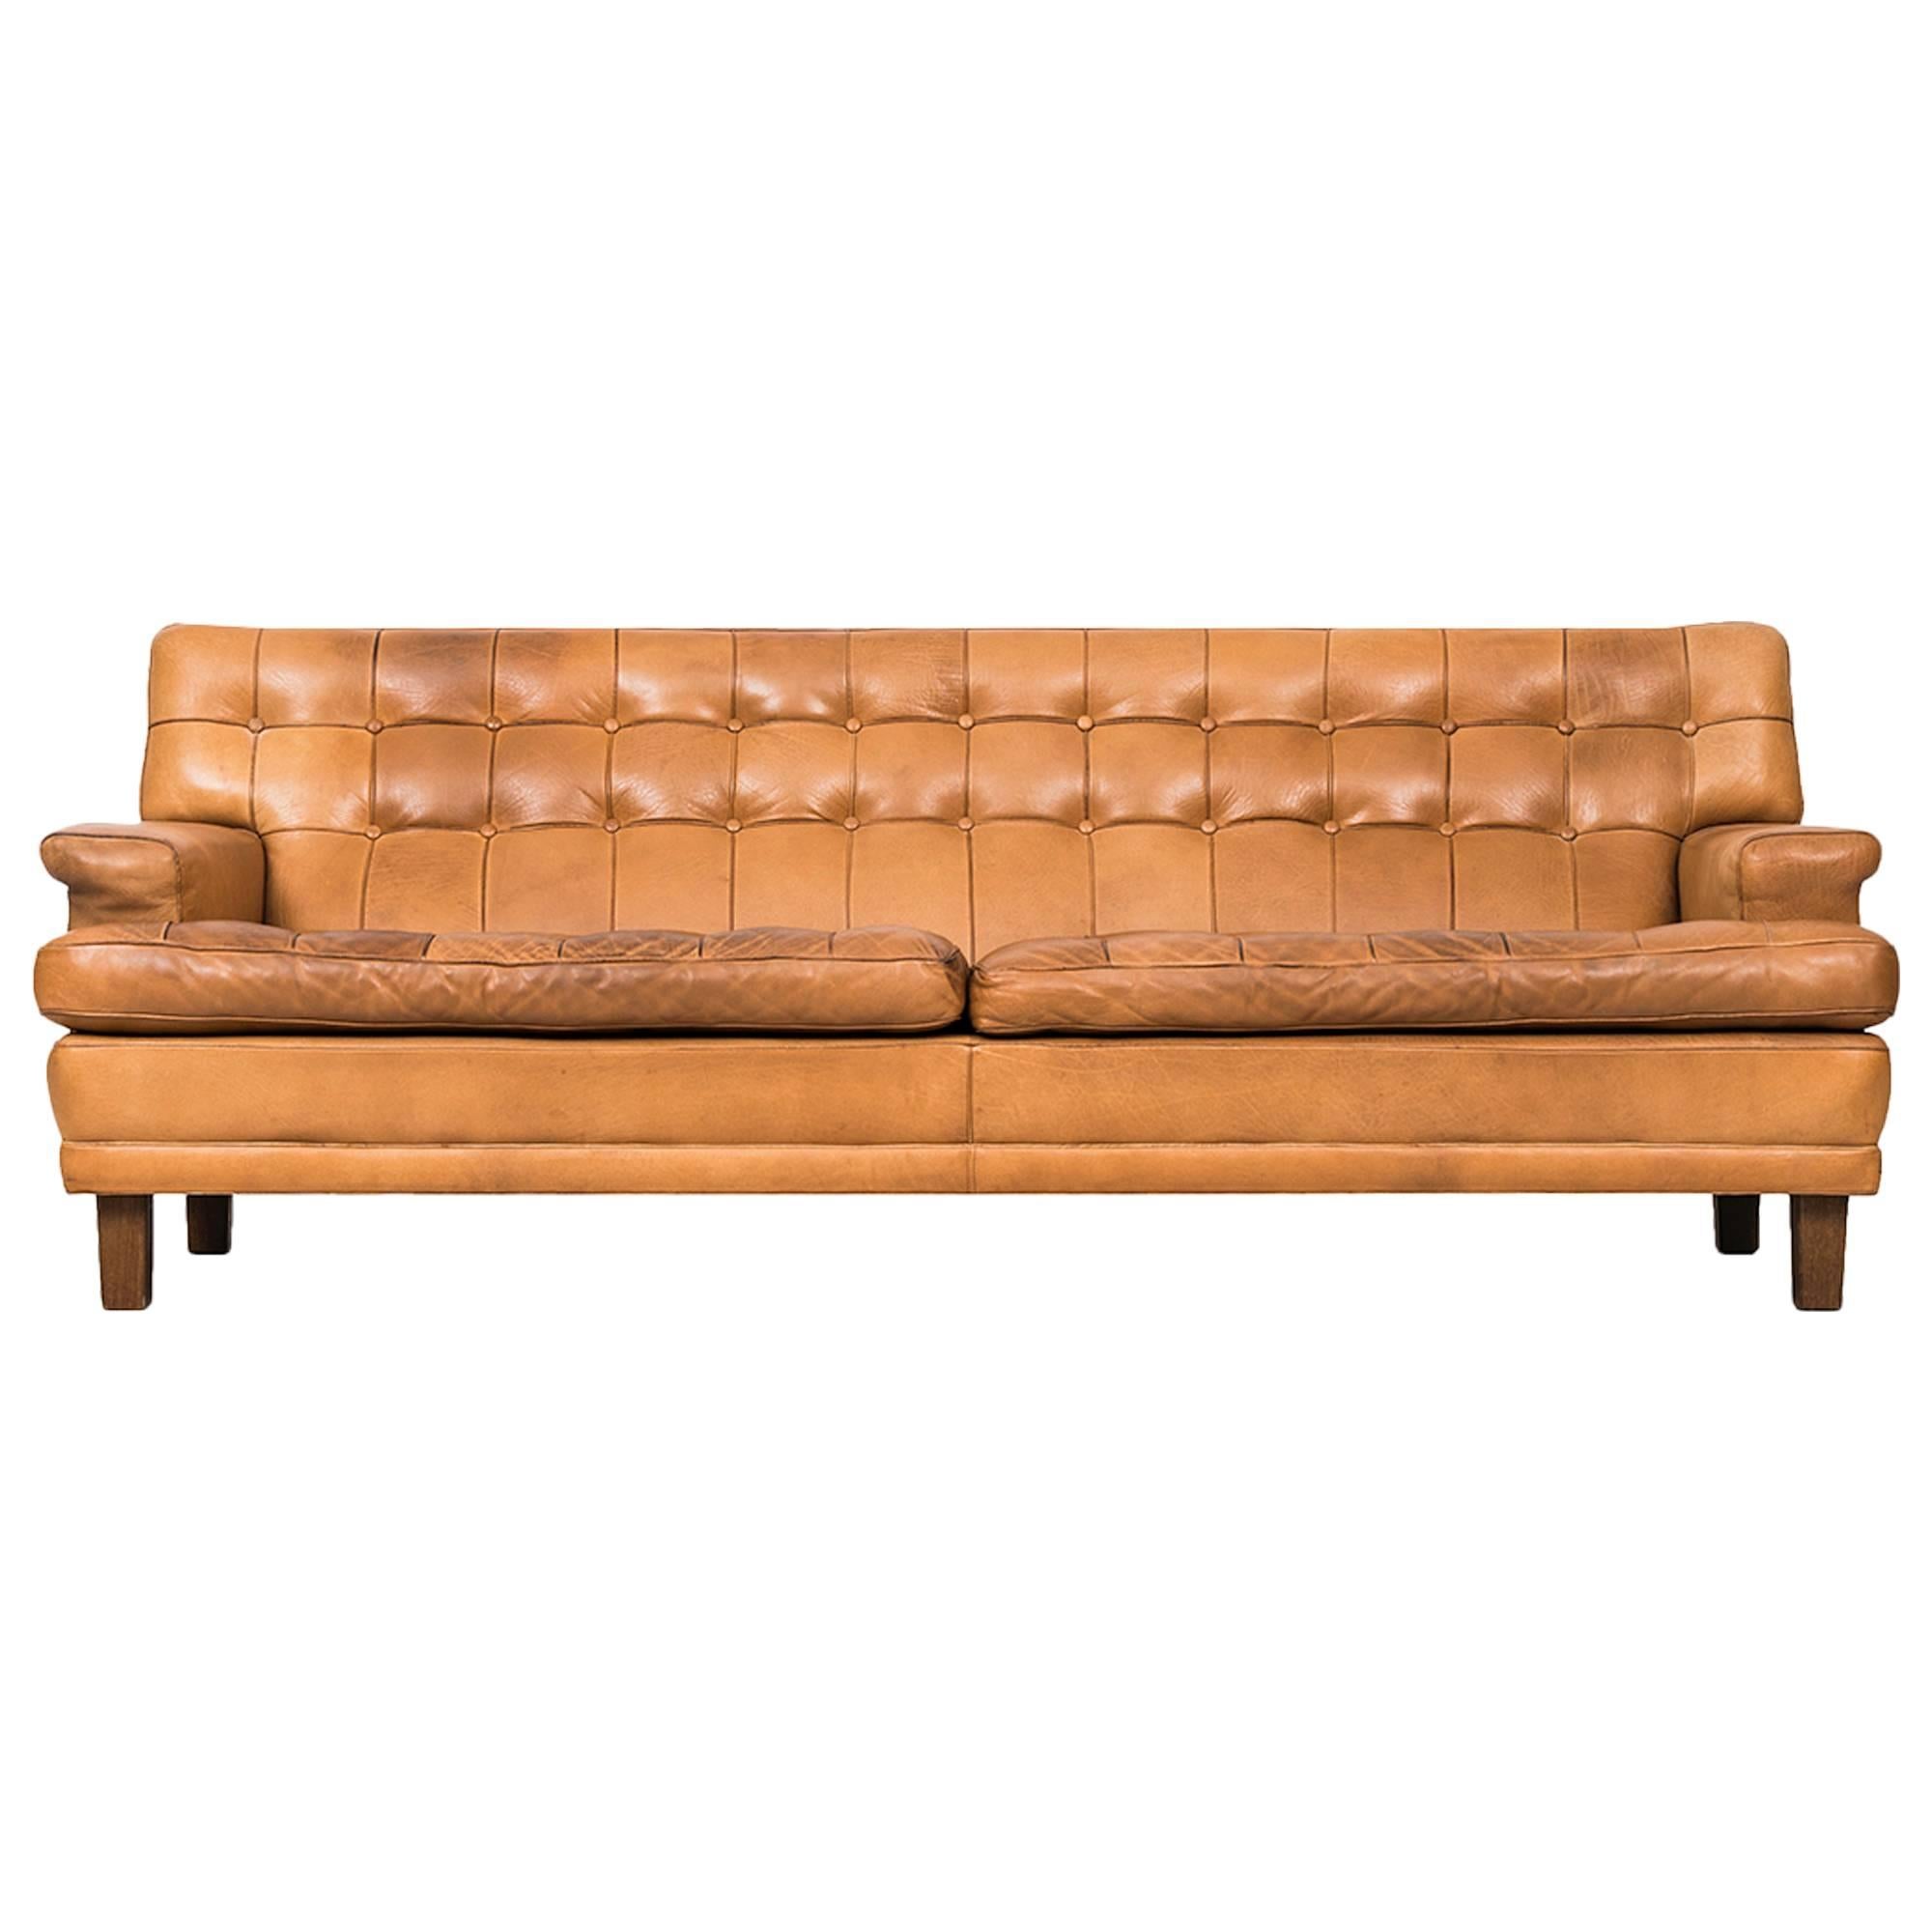 Arne Norell Merkur sofa in cognac brown leather by Norell AB in Sweden